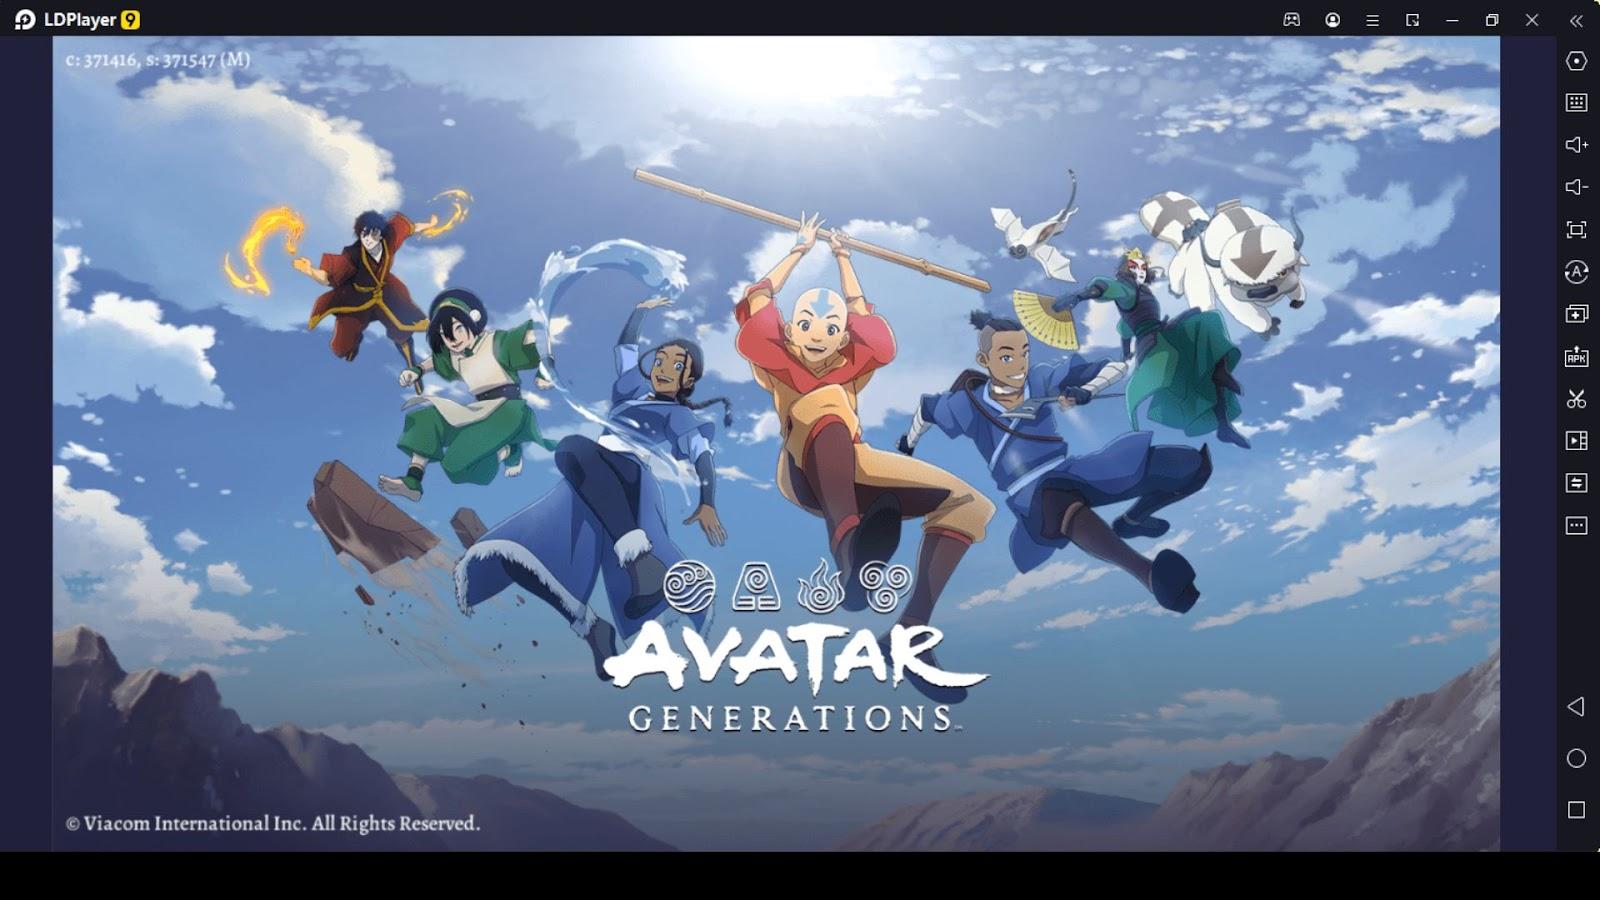 Which Nation From Avatar The Last Airbender Do You Belong To